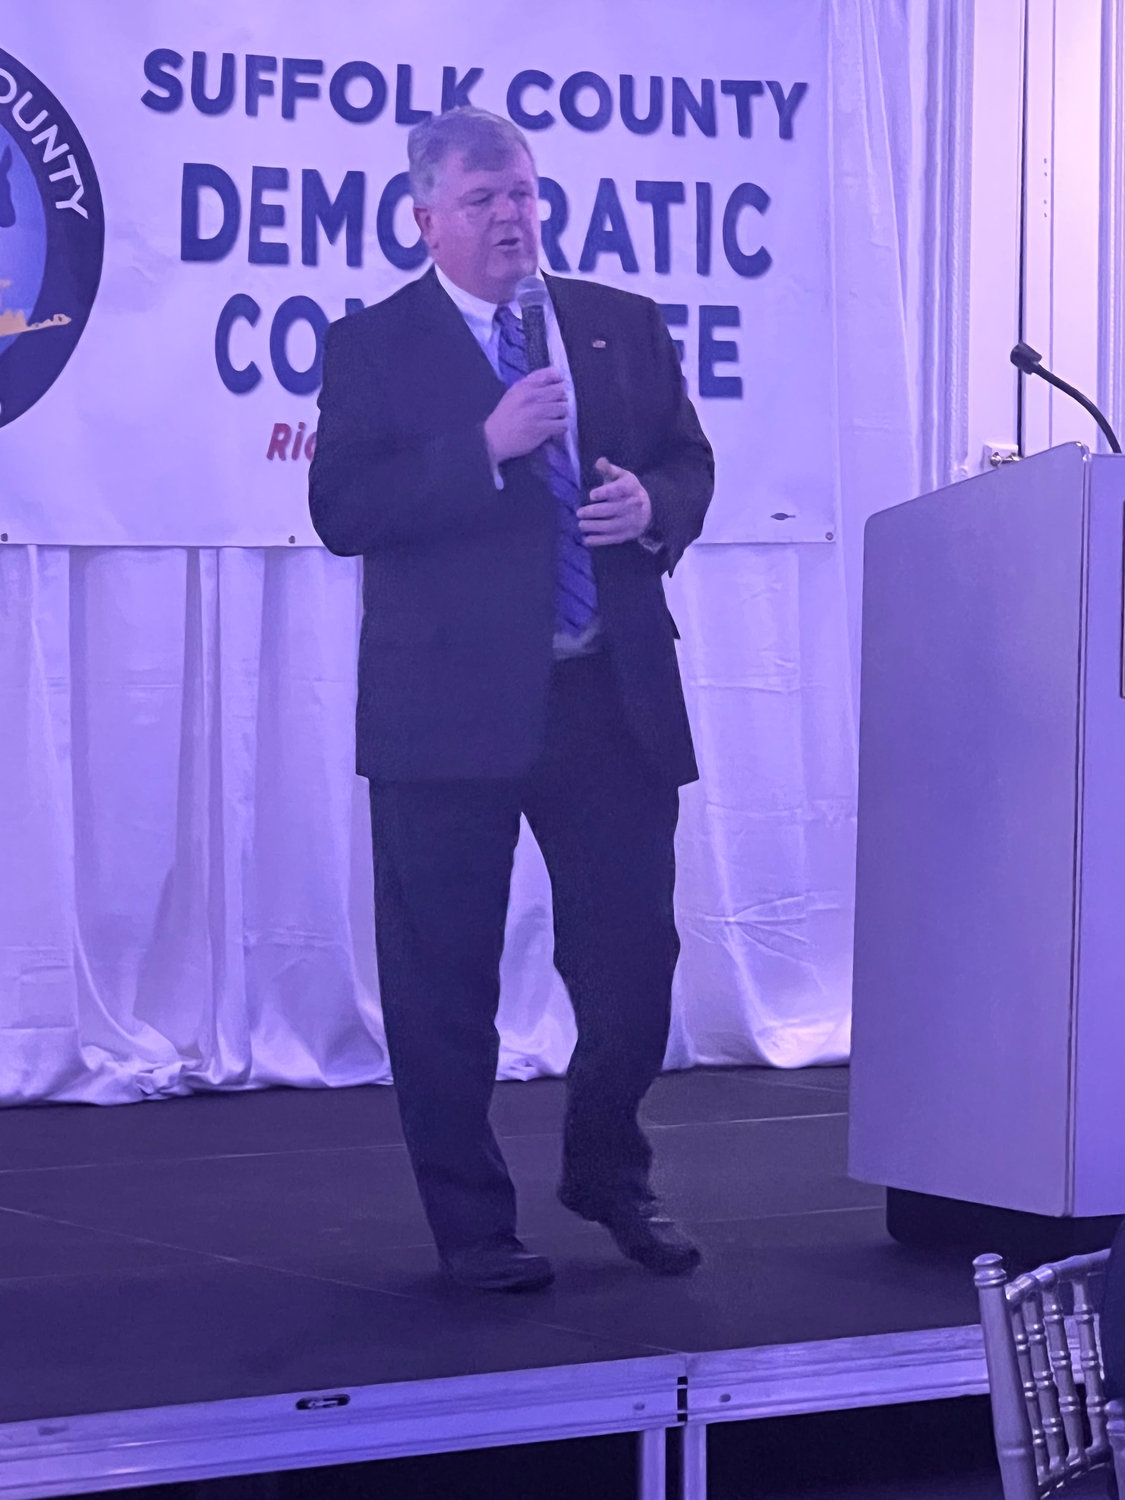 Chairman Rich Schaffer addresses the Democratic caucus as the first speaker at the Fall Dinner held to support the Suffolk County Democratic Committee at elegant Villa Lombardi’s.